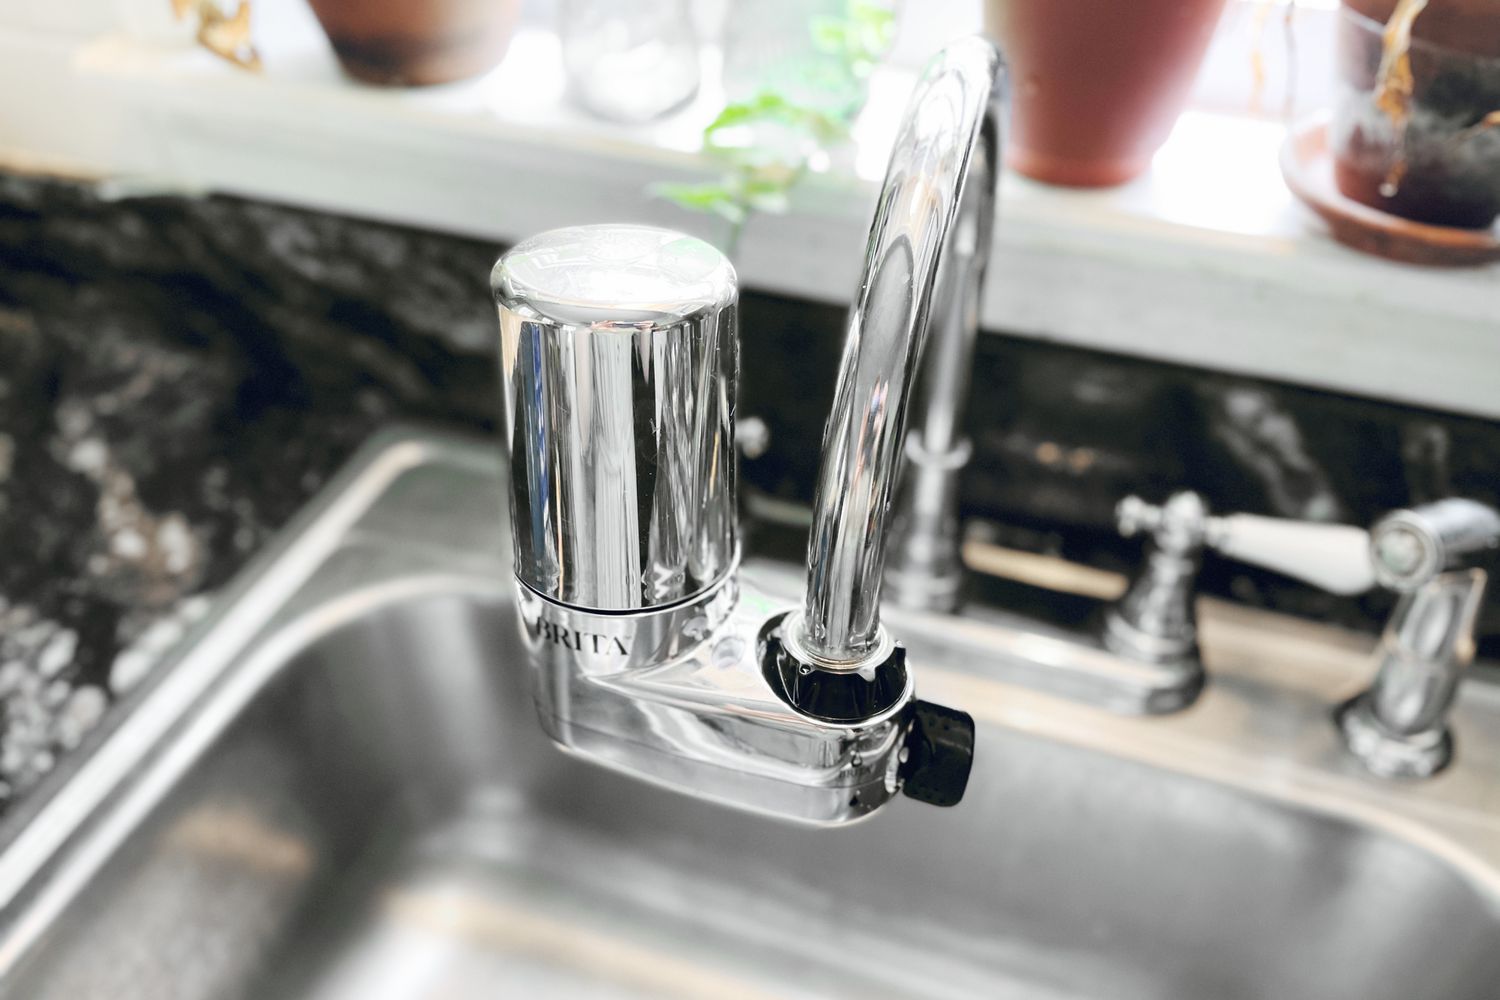 How To Install A Water Filter Faucet 1693331429 